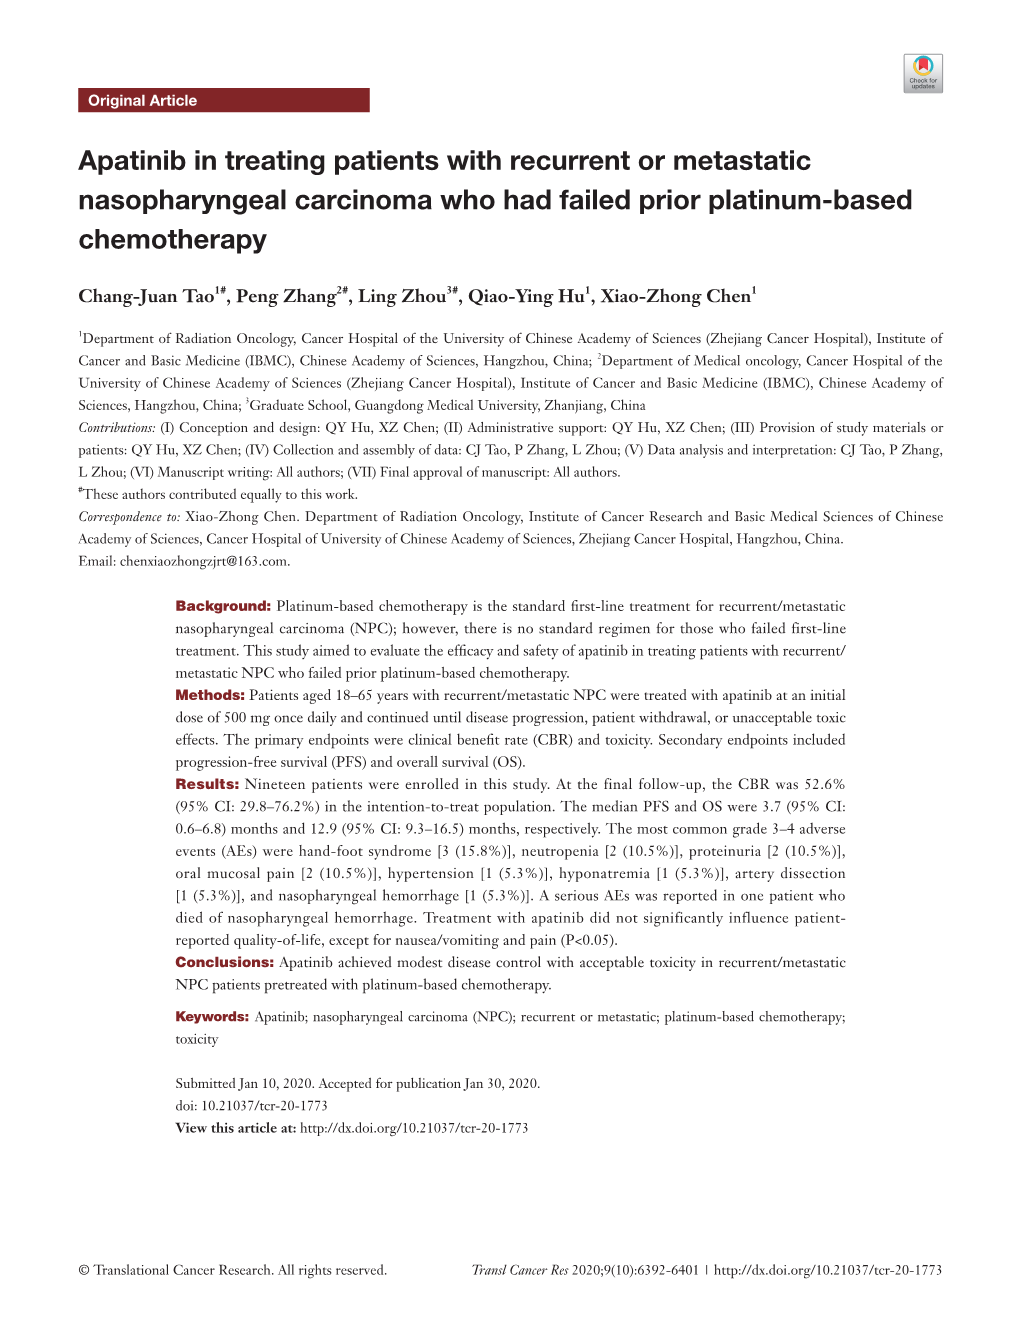 Apatinib in Treating Patients with Recurrent Or Metastatic Nasopharyngeal Carcinoma Who Had Failed Prior Platinum-Based Chemotherapy